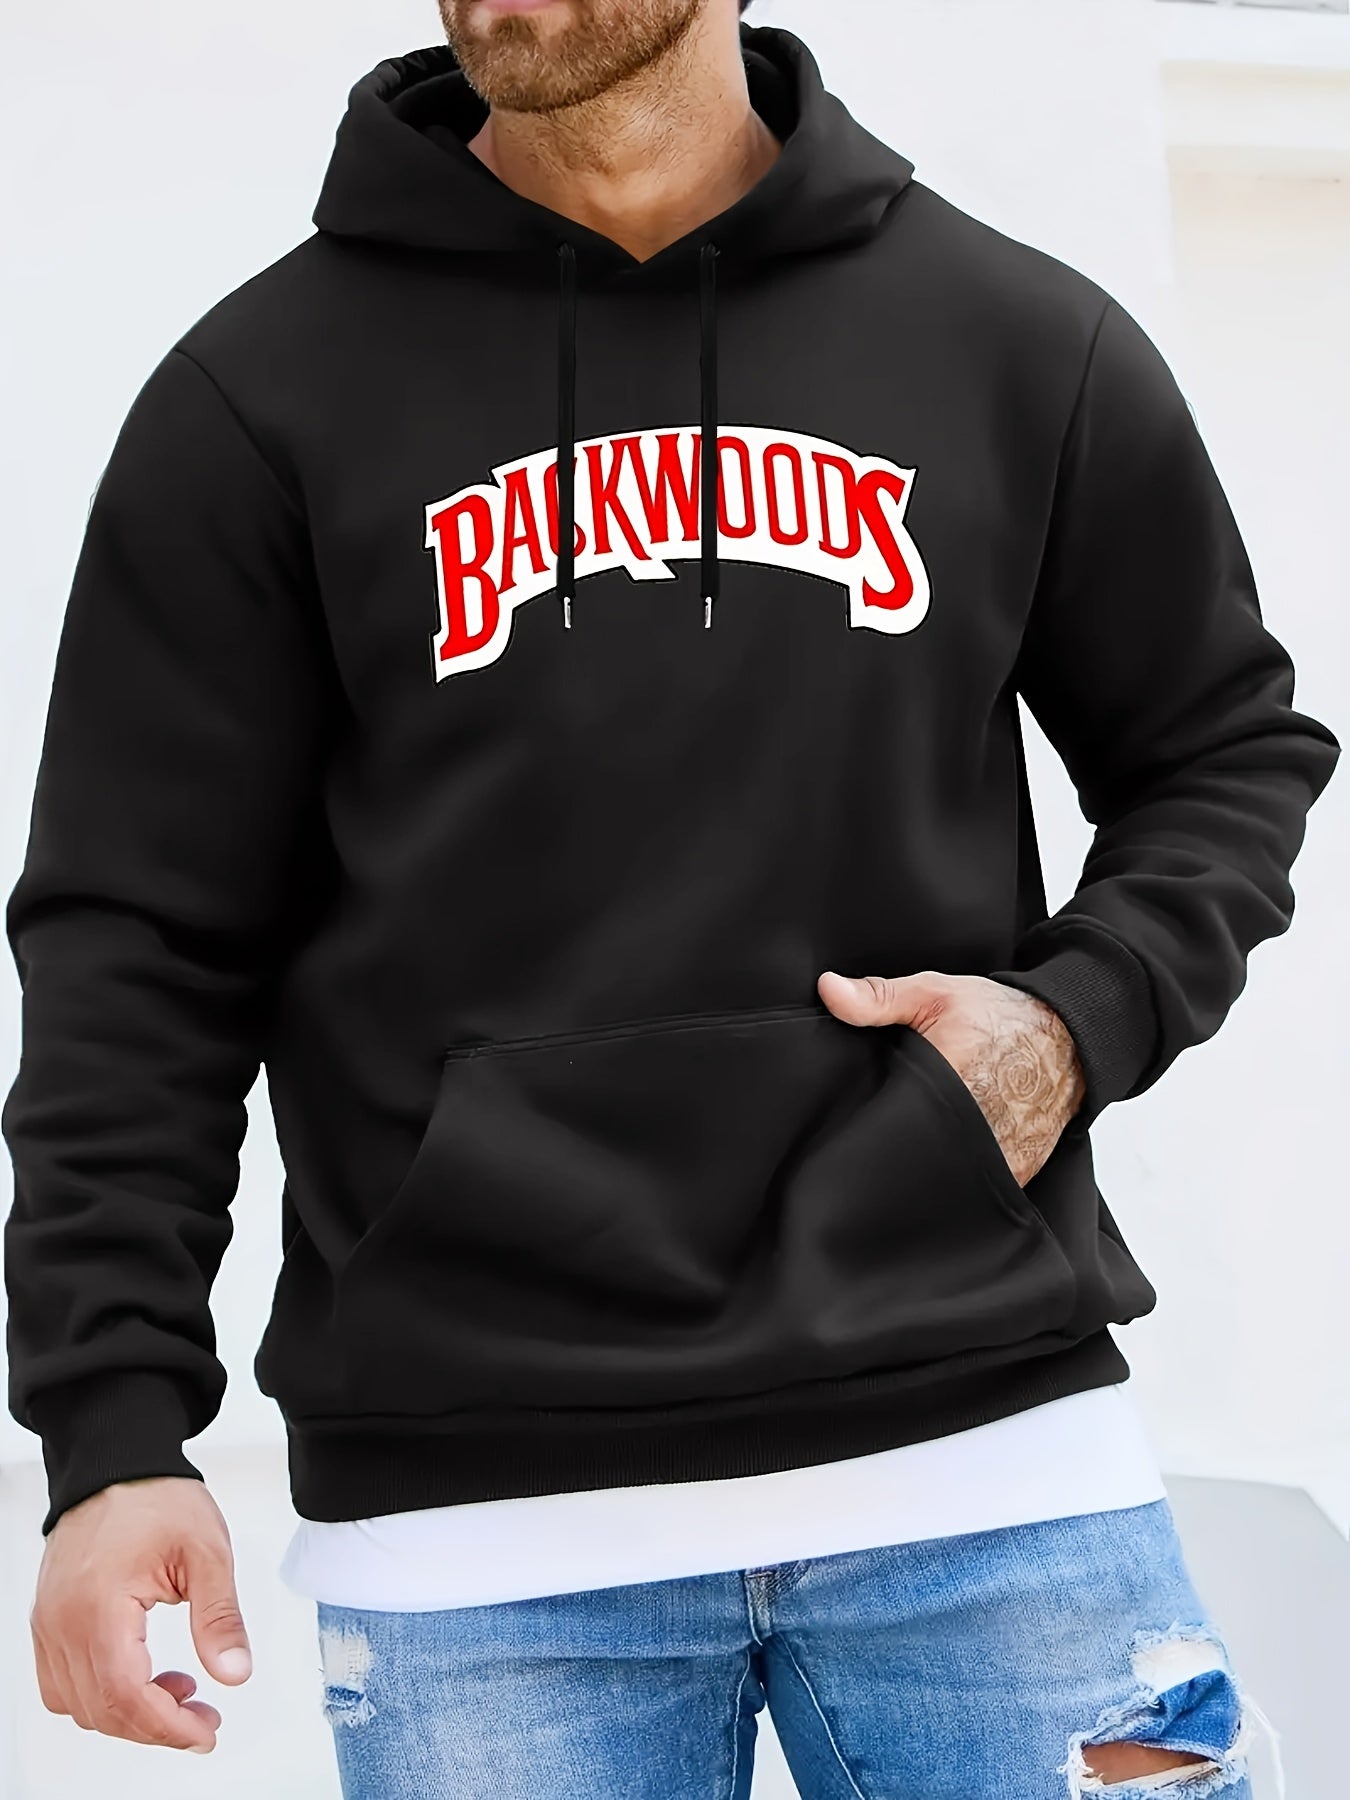 BACKWOODS Print Hoodie, Cool Hooded Pullover For Men, Men's Casual Graphic Design Slightly Flex Streetwear Sweatshirt For Spring Fall And Winter, As Gifts